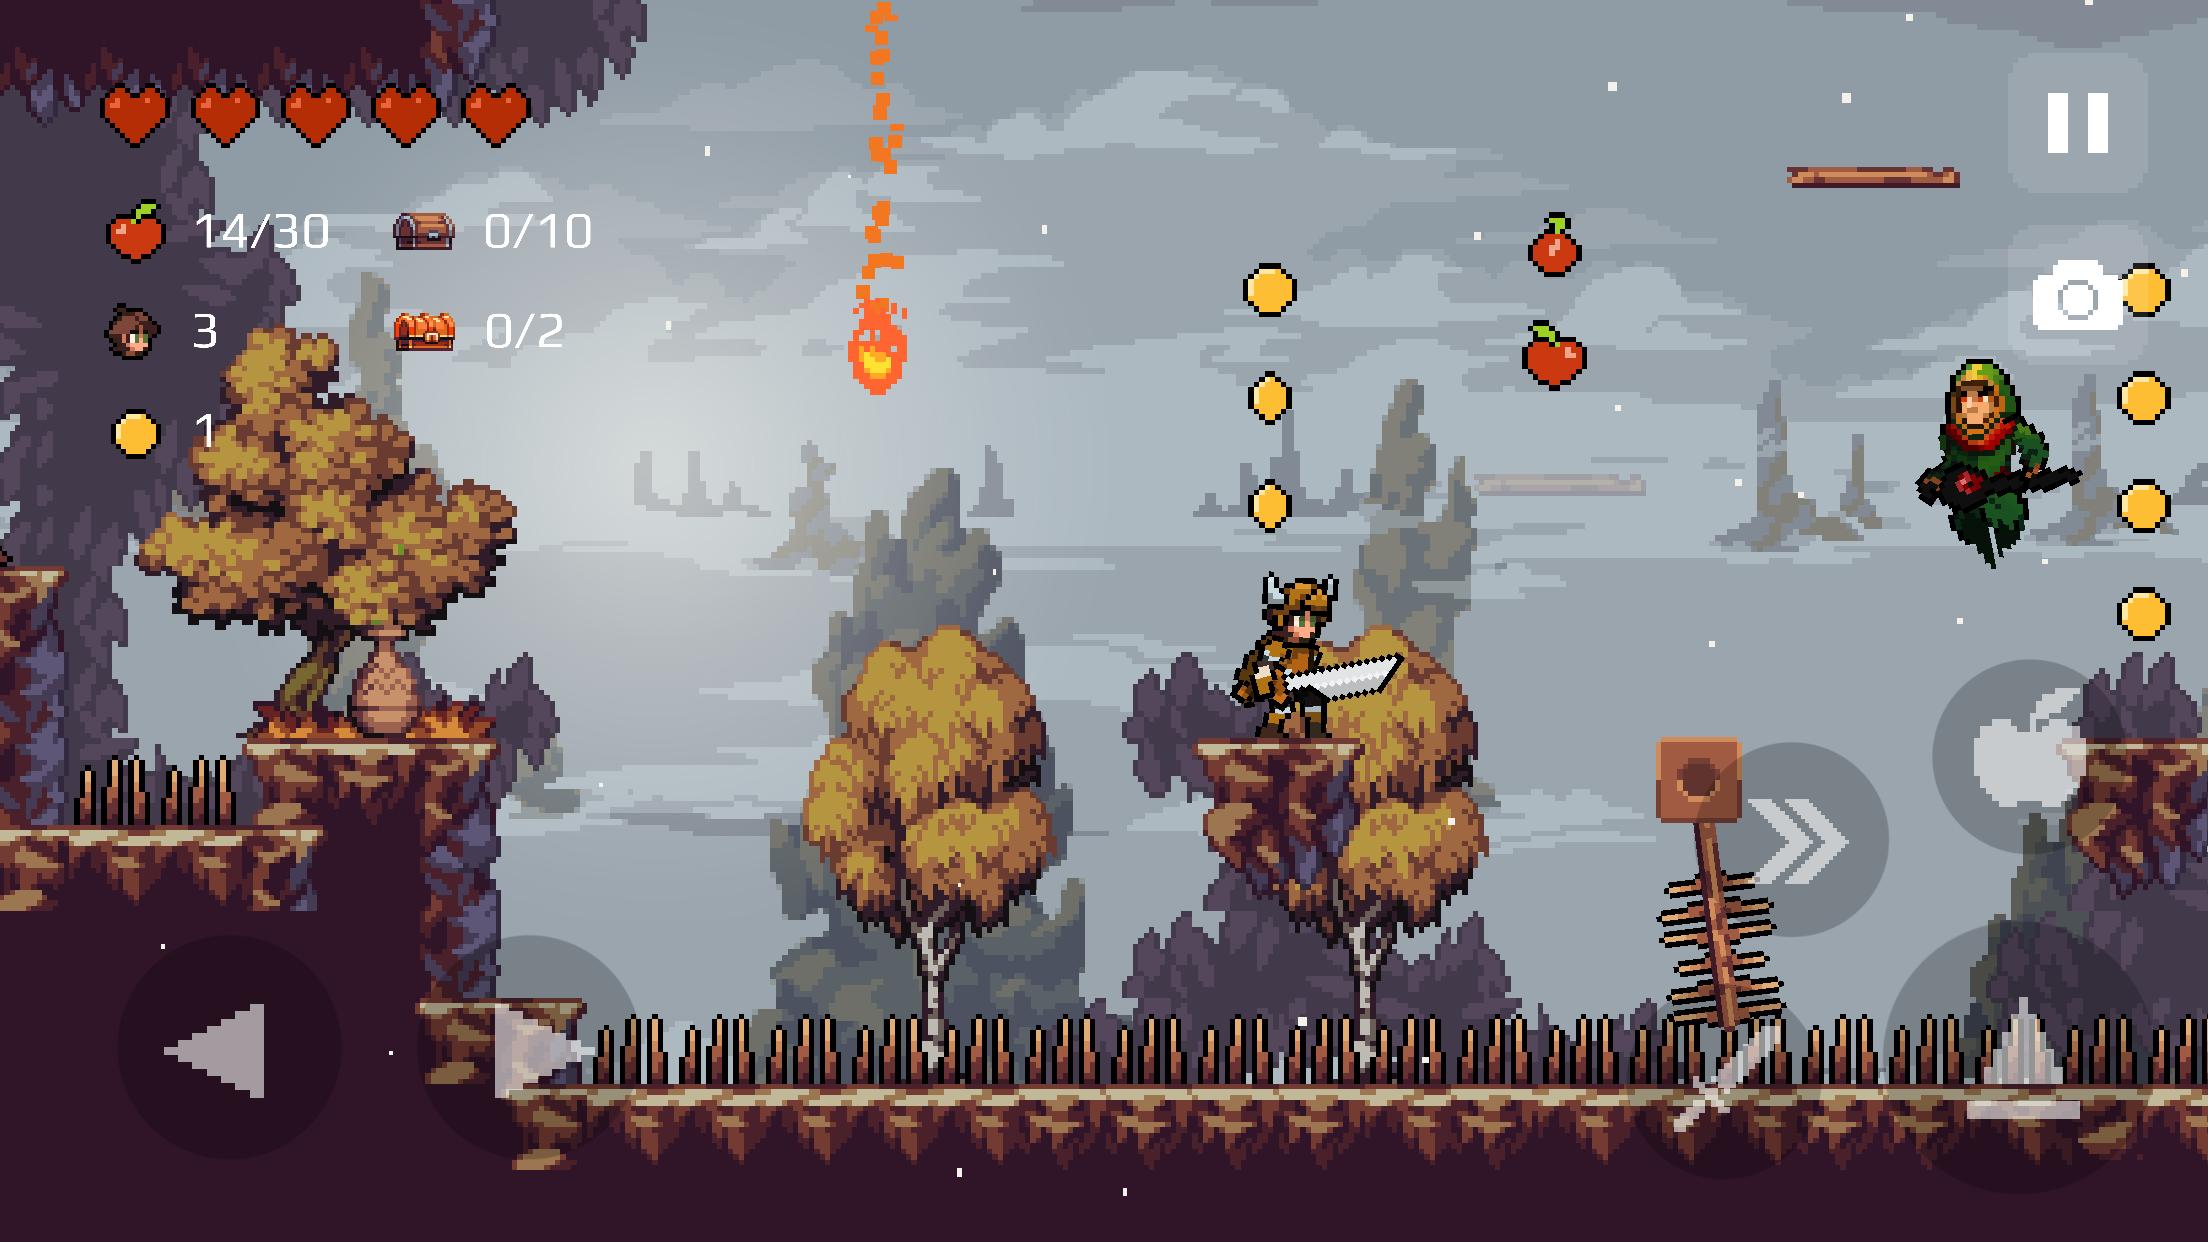 Apple Knight: Action Platformer Pro for Android - Download